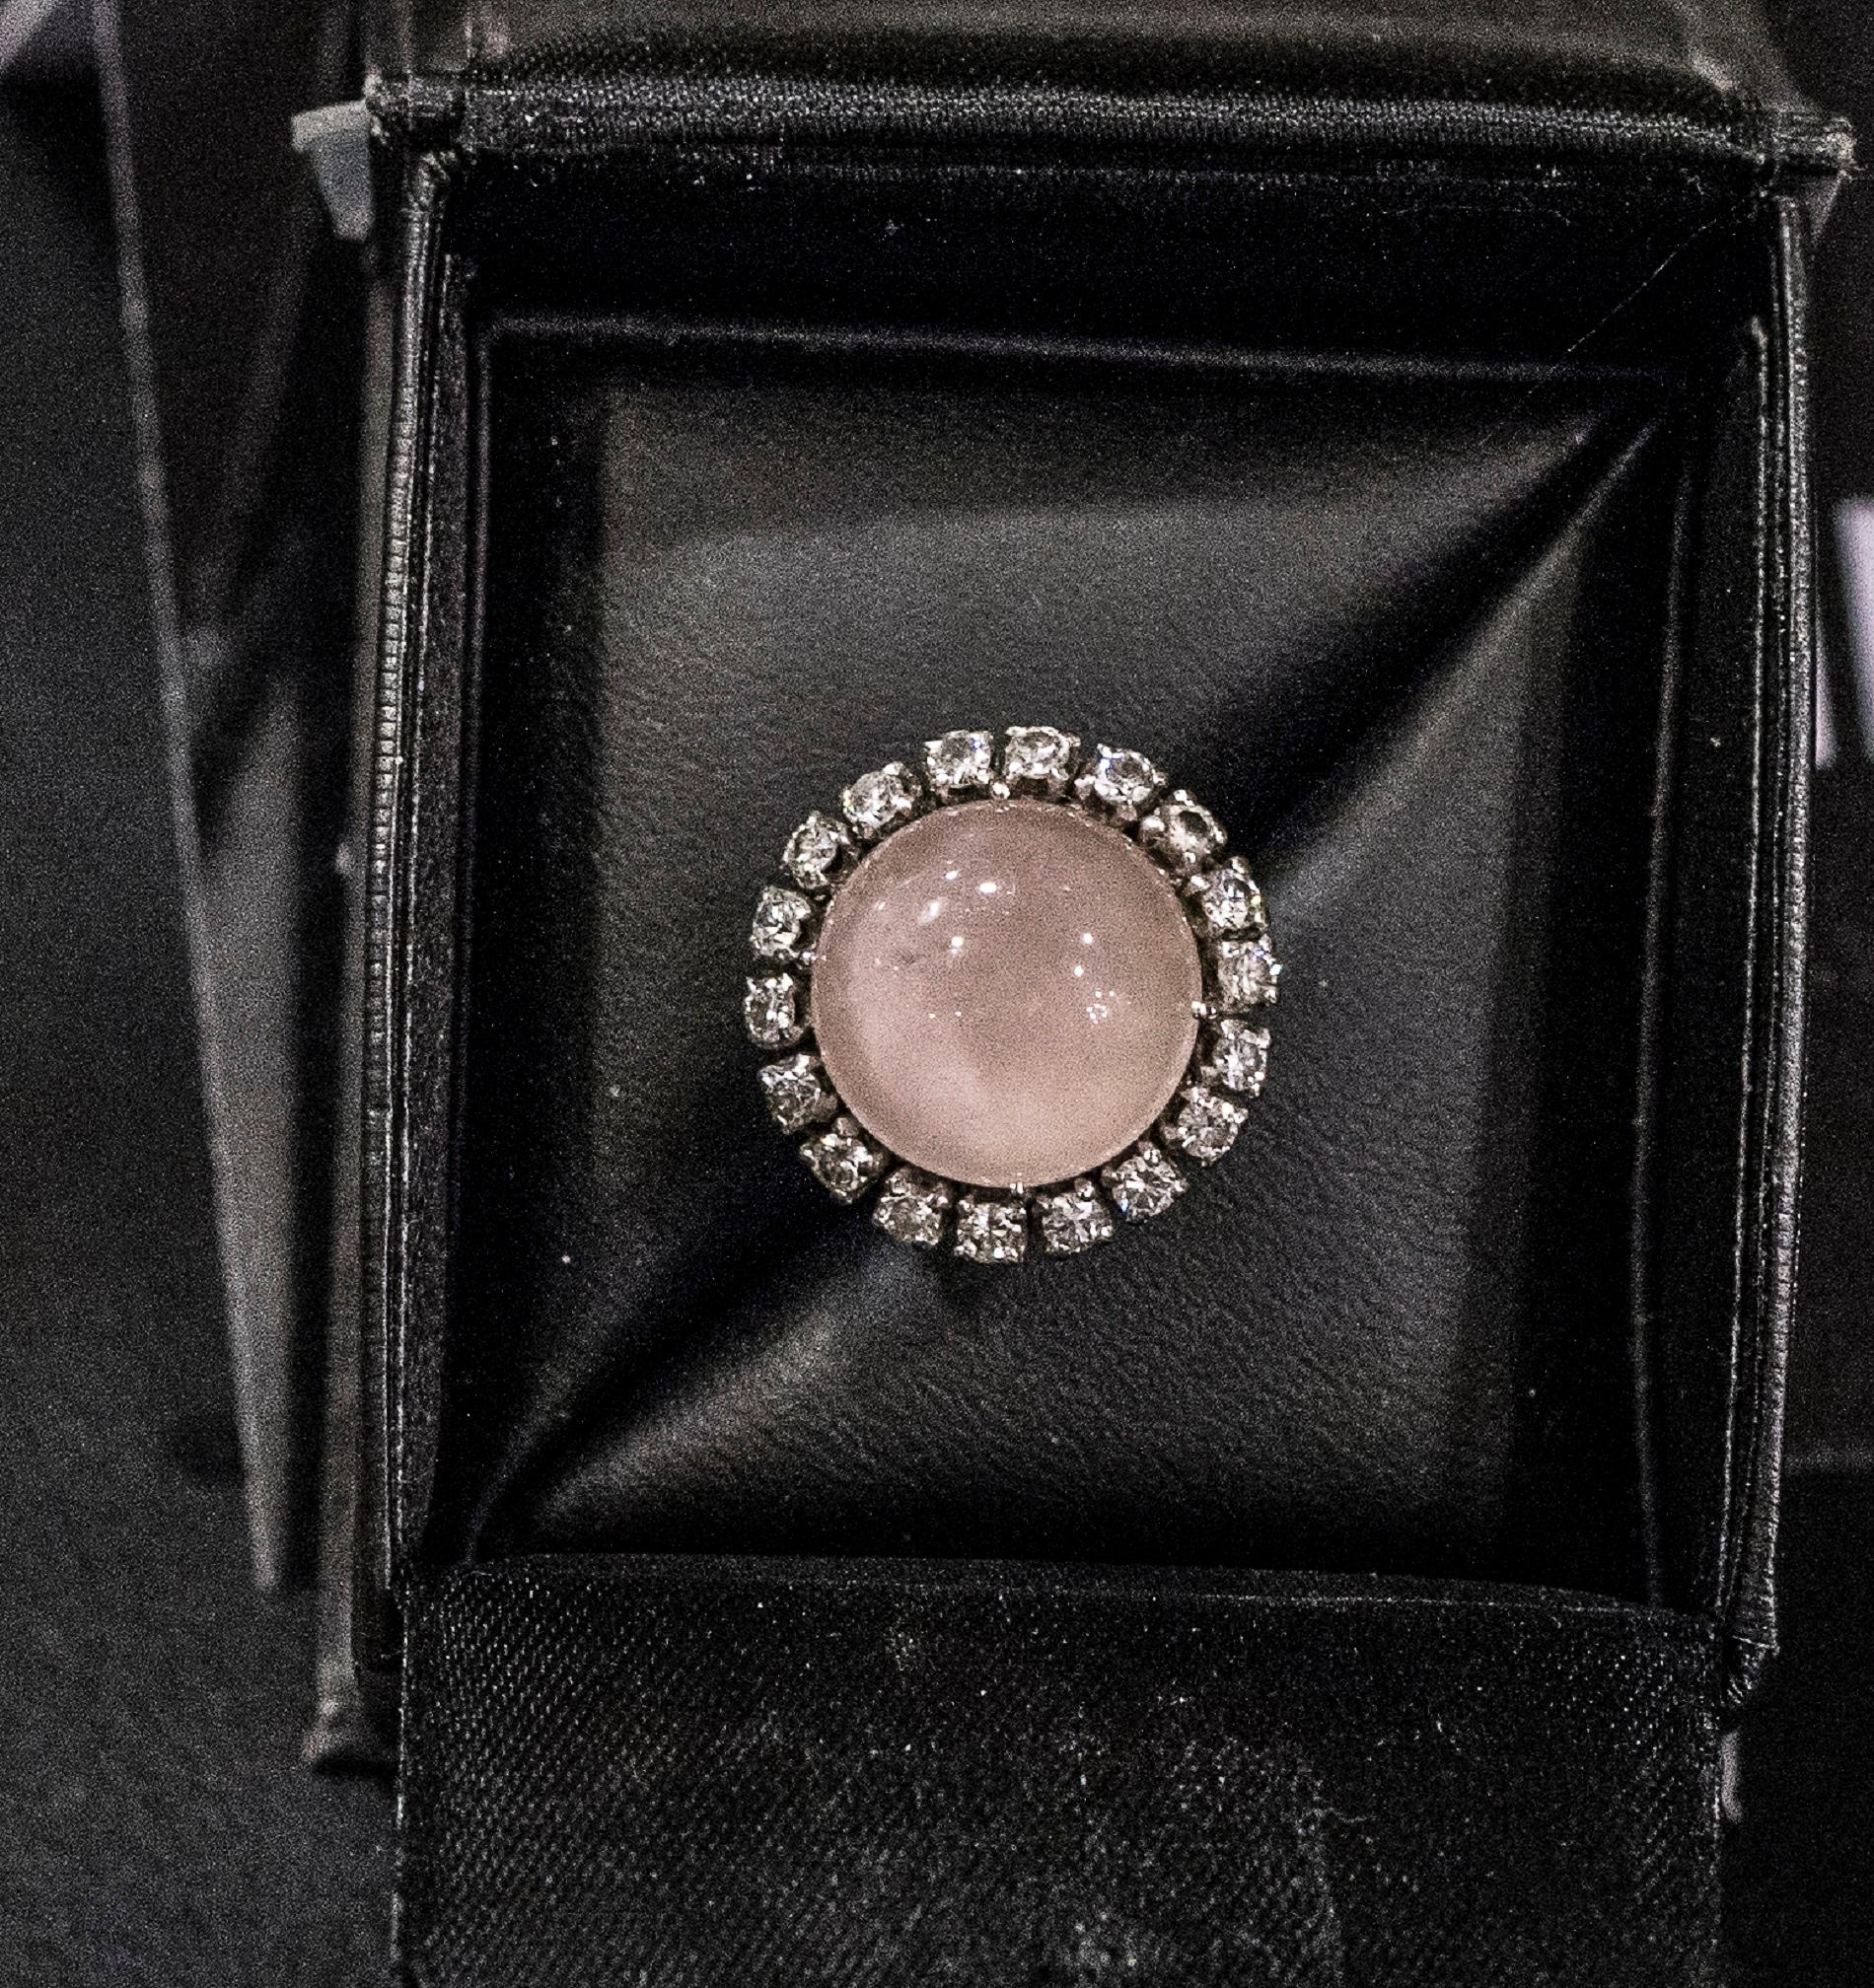 One of a kind 19th century French gold ring with a central pink quartz and diamonds border brilliant cut and antique engarze.
It has been purchased in a French inheritance.
Beautiful and unique.